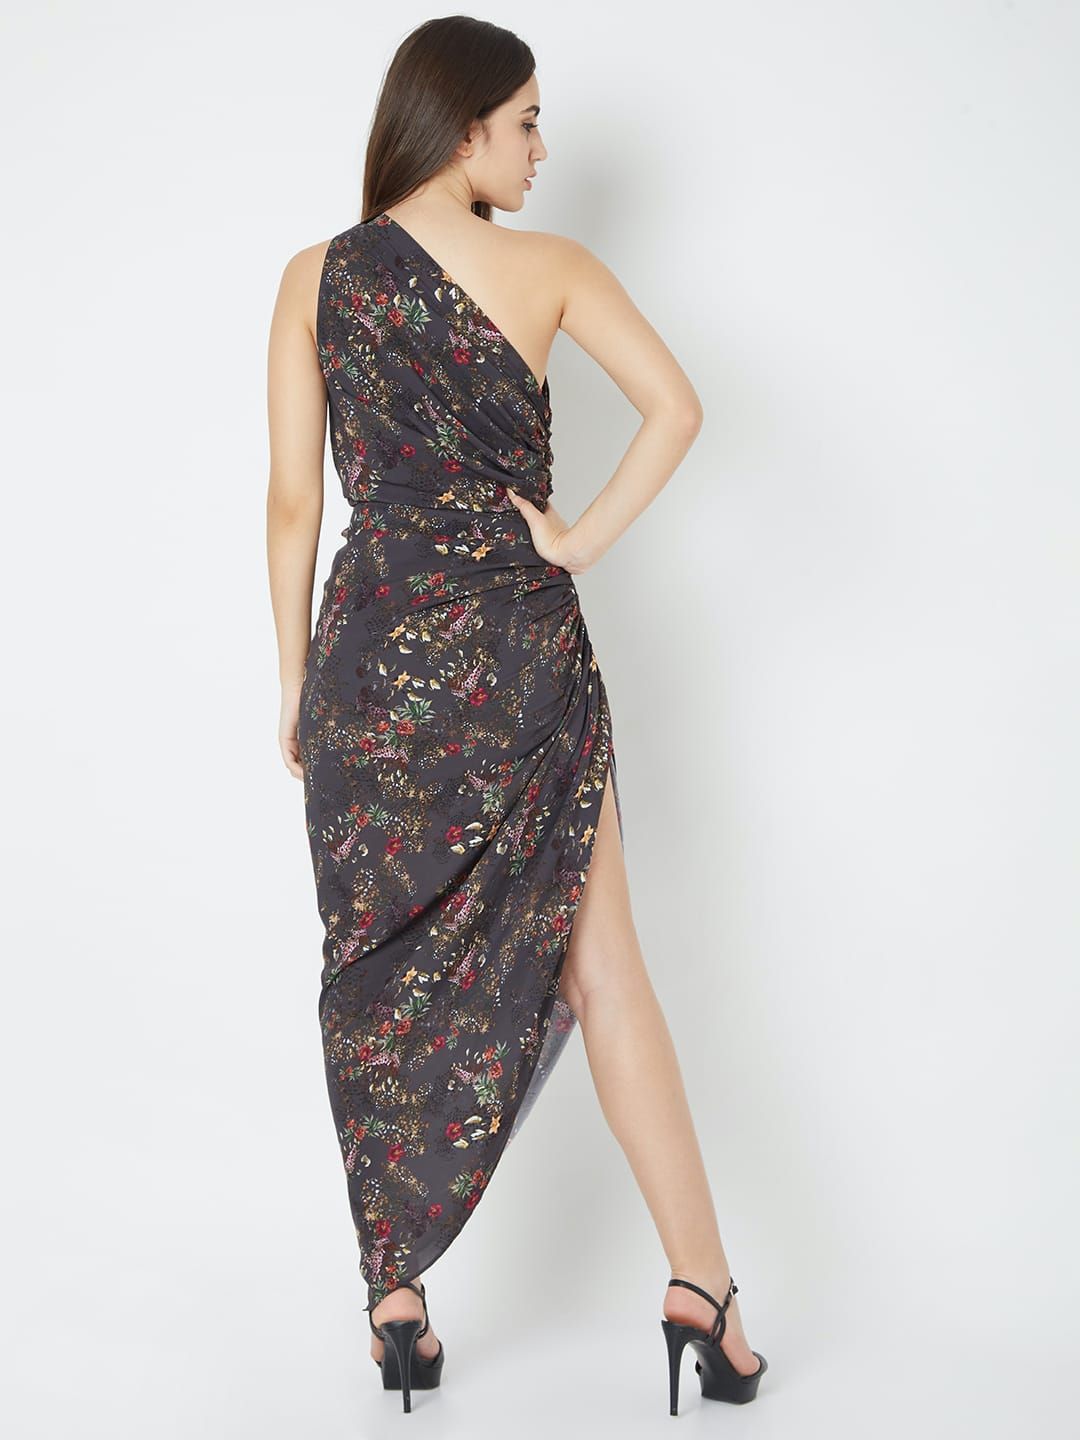 The Harlem Dresses for Women - Reema Anand Label